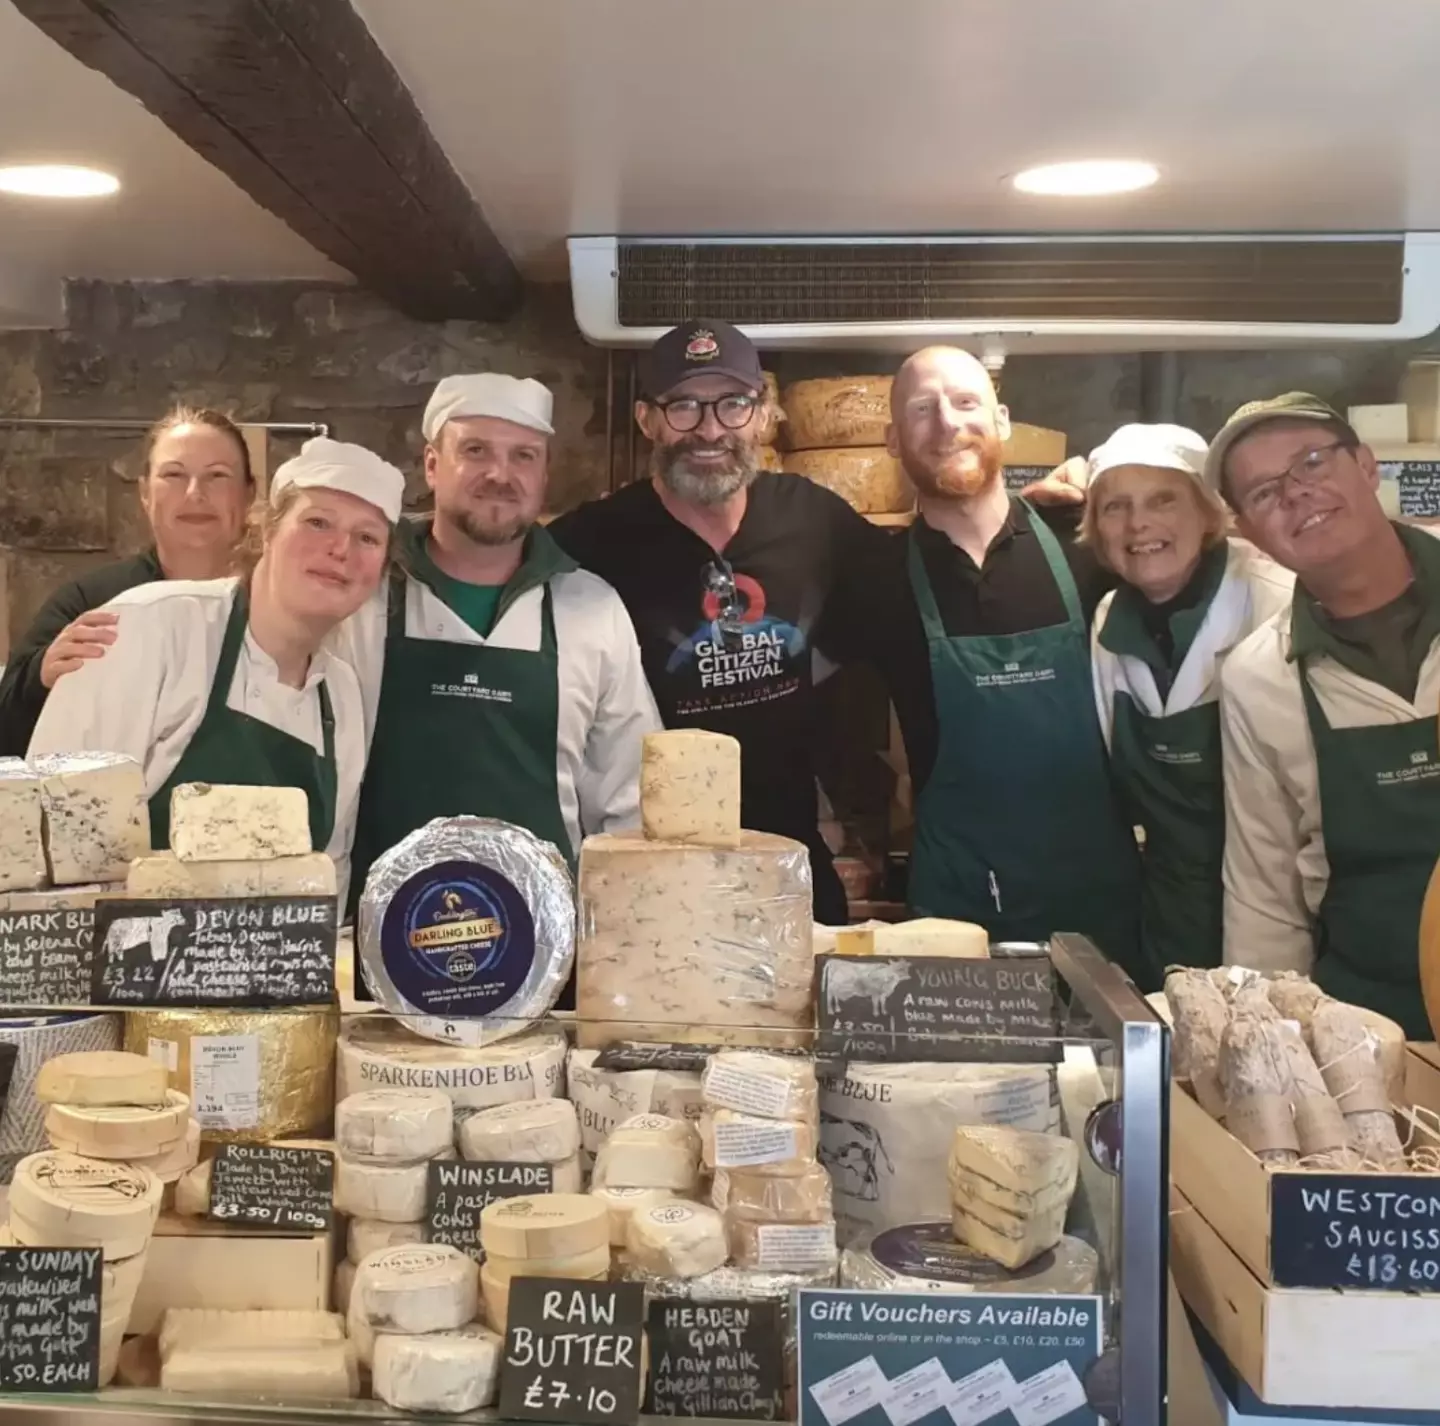 The Wolverine star also visited a cheese shop.